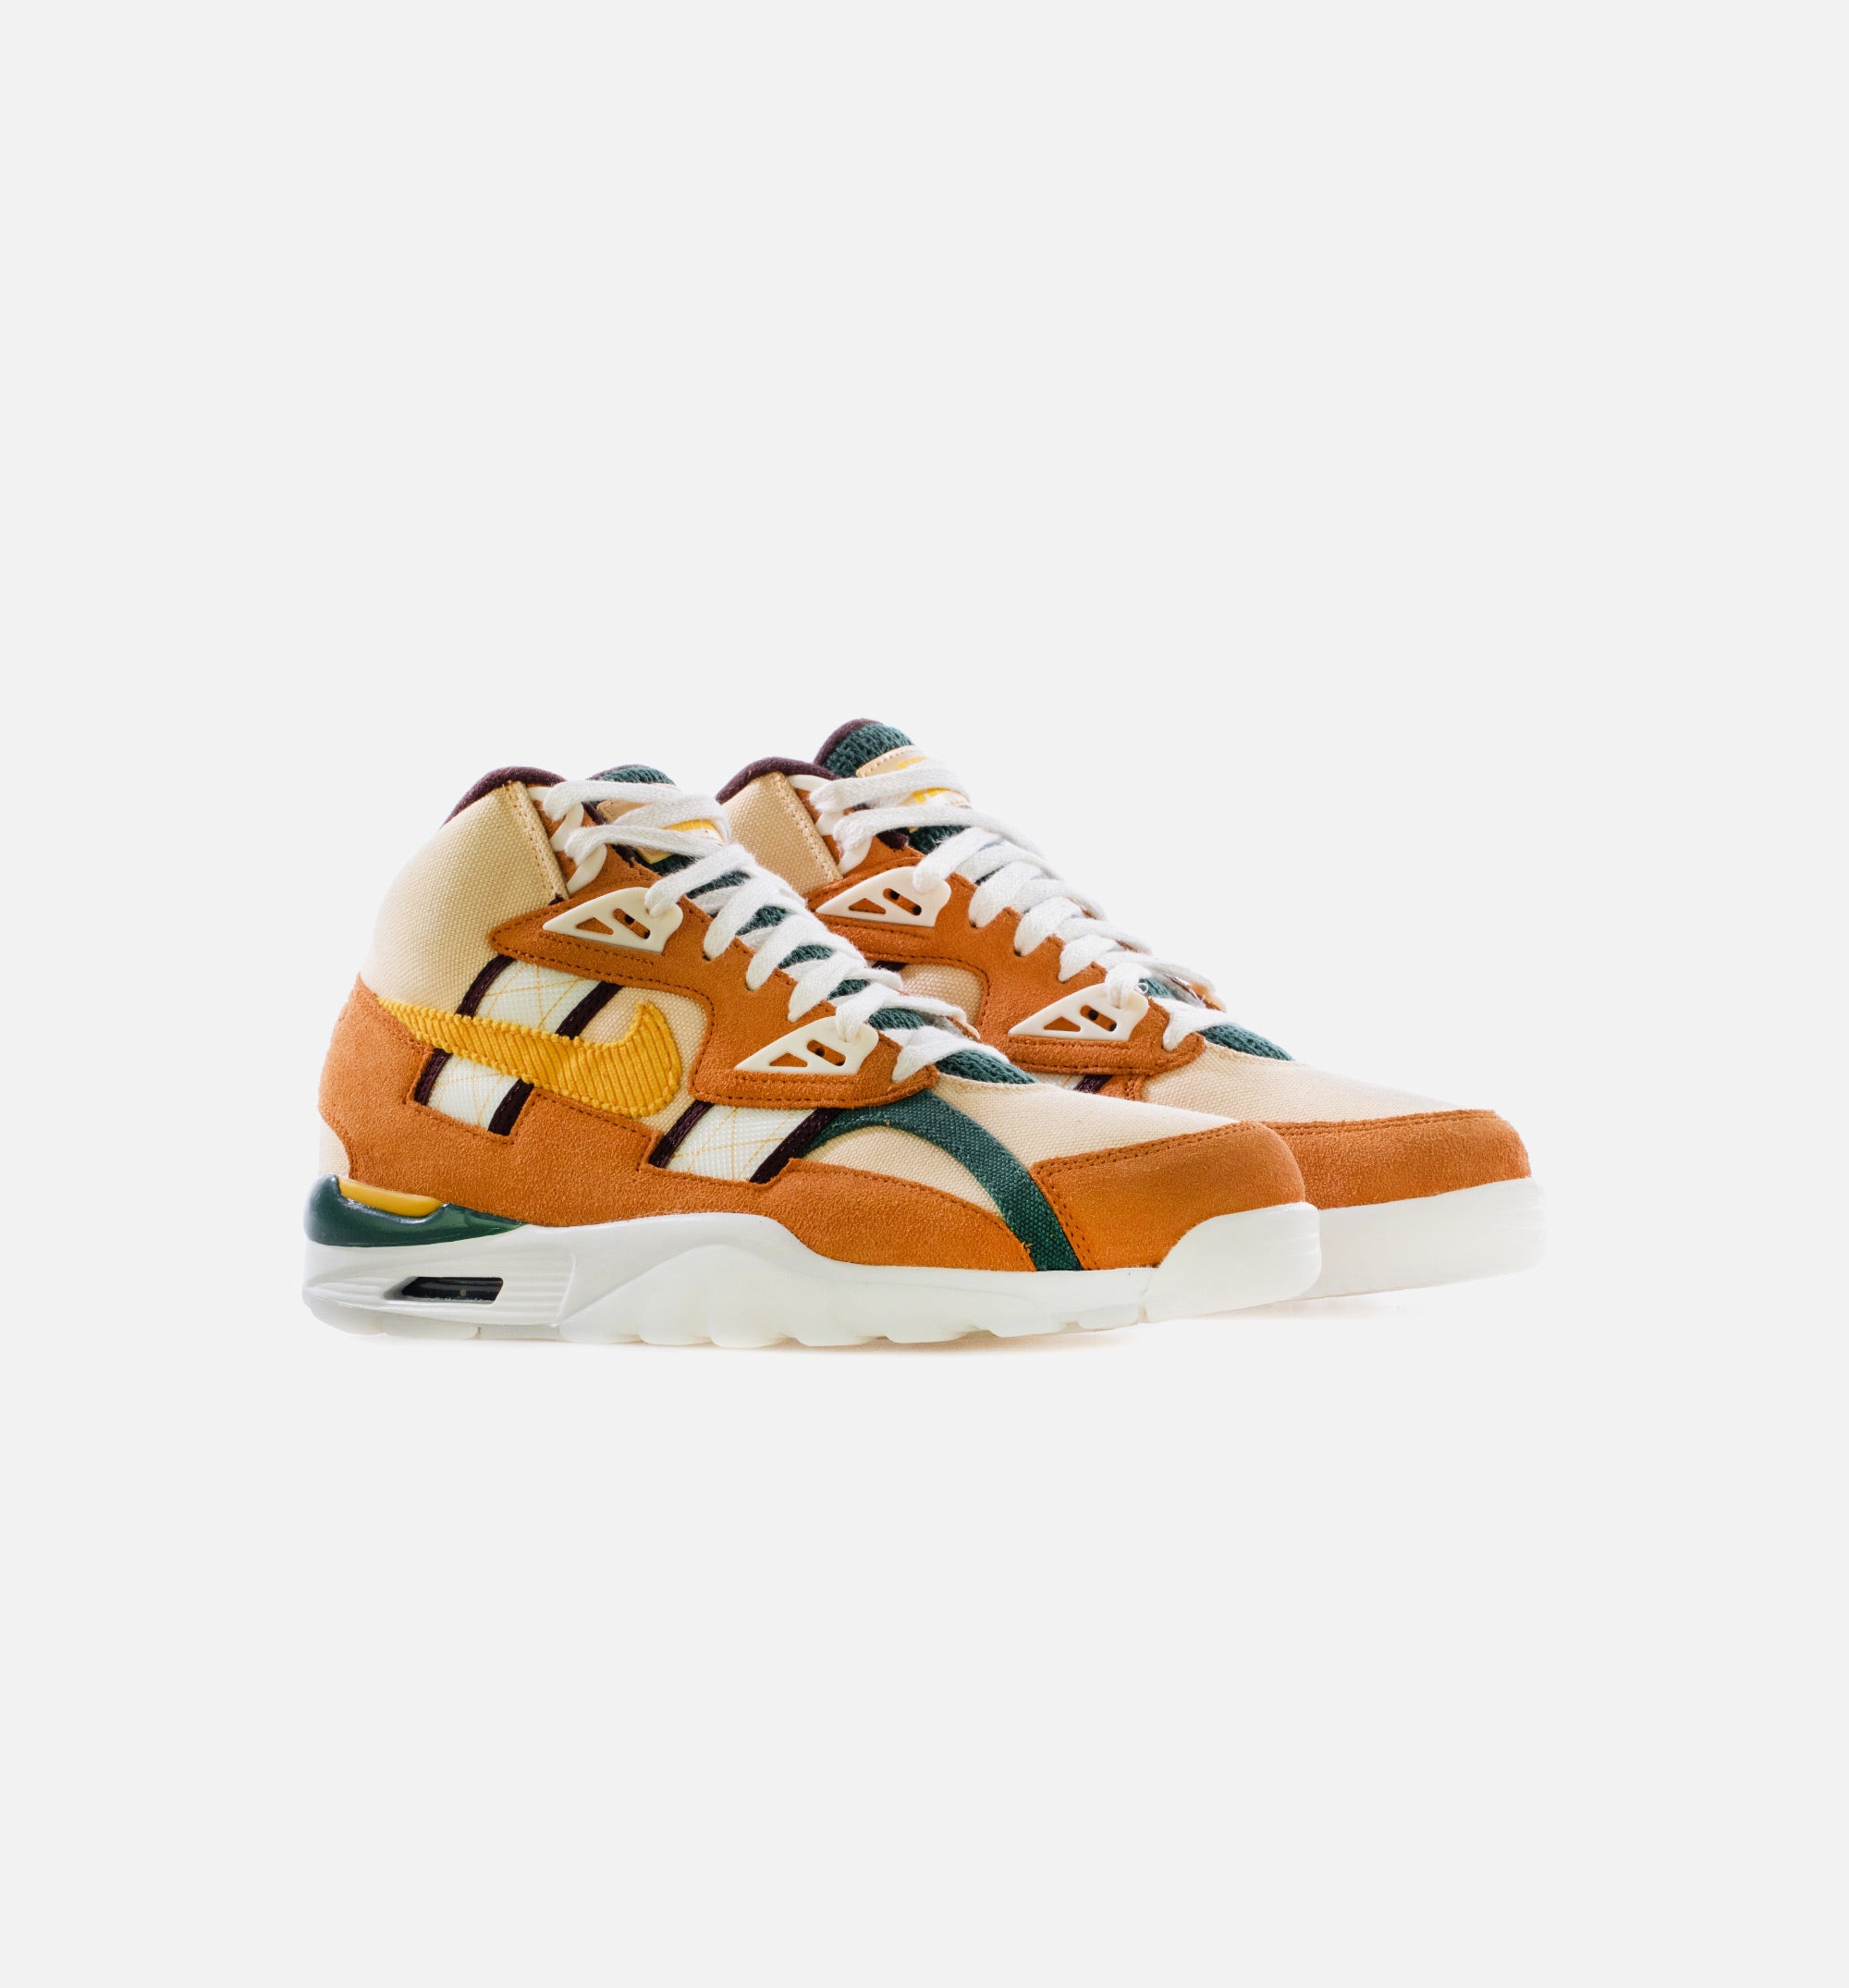 Nike Air Trainer SC High Shoes Canvas Pollen Cider DO6696-700 Men's Sizes  NEW